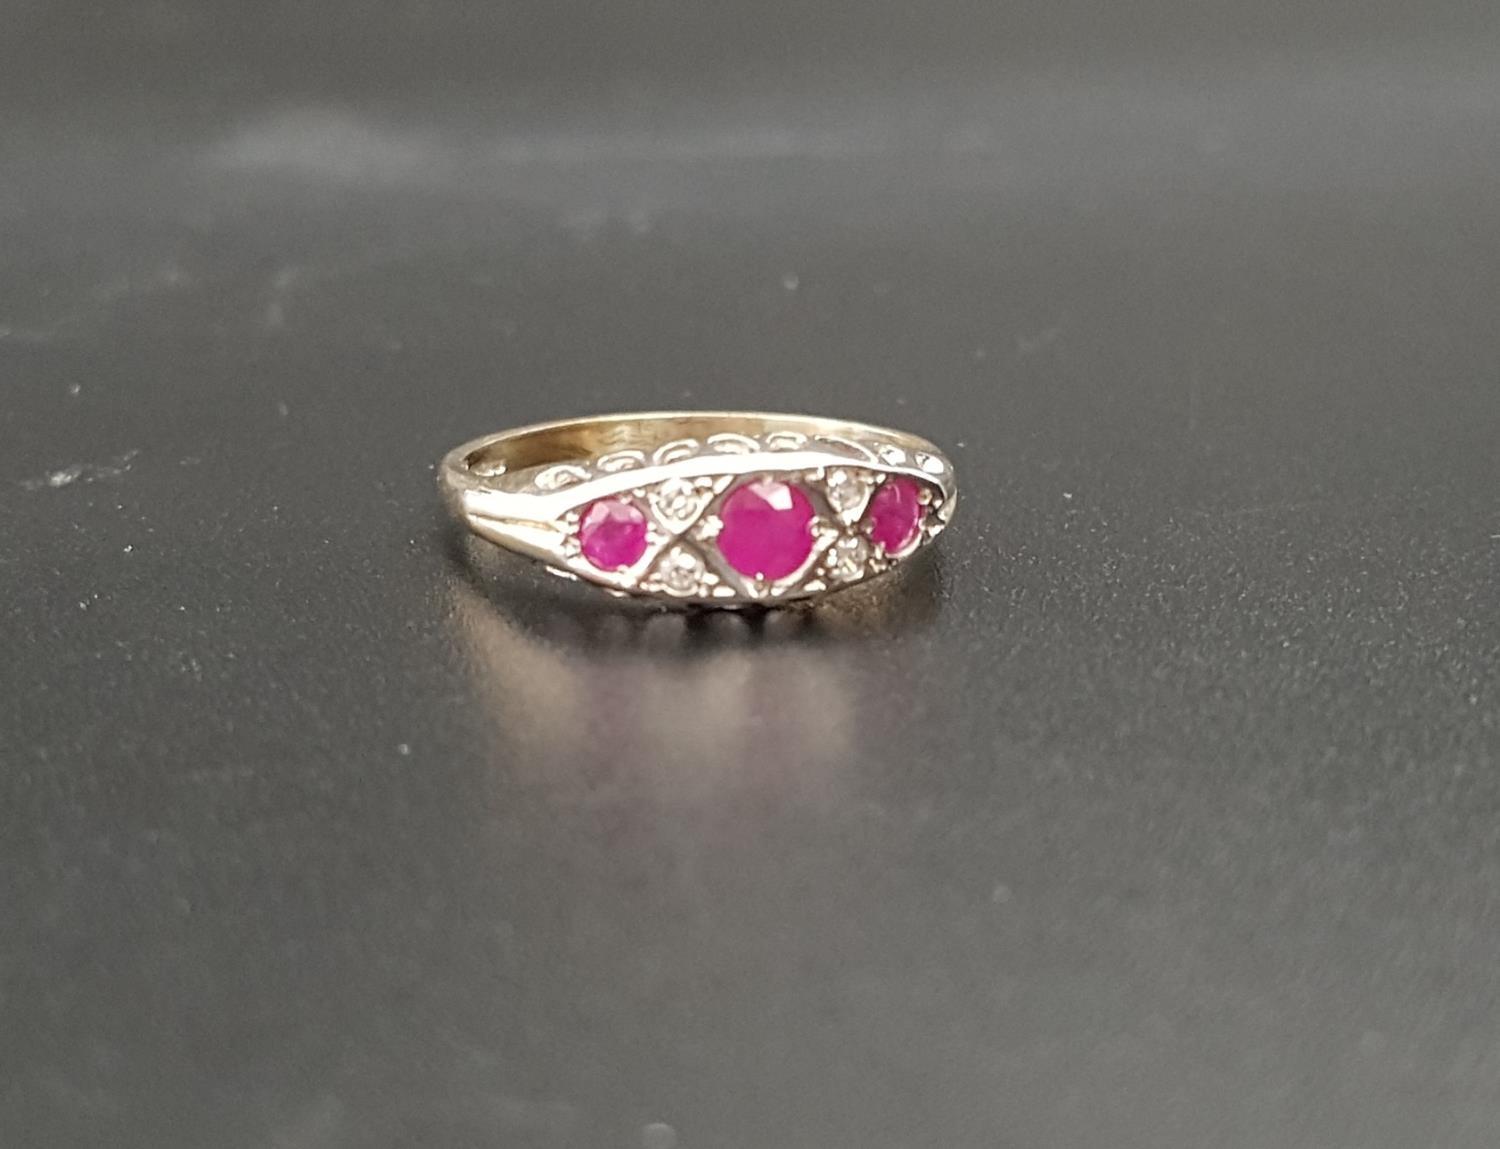 RUBY AND DIAMOND RING the three graduated rubies with small diamonds between, on nine carat gold